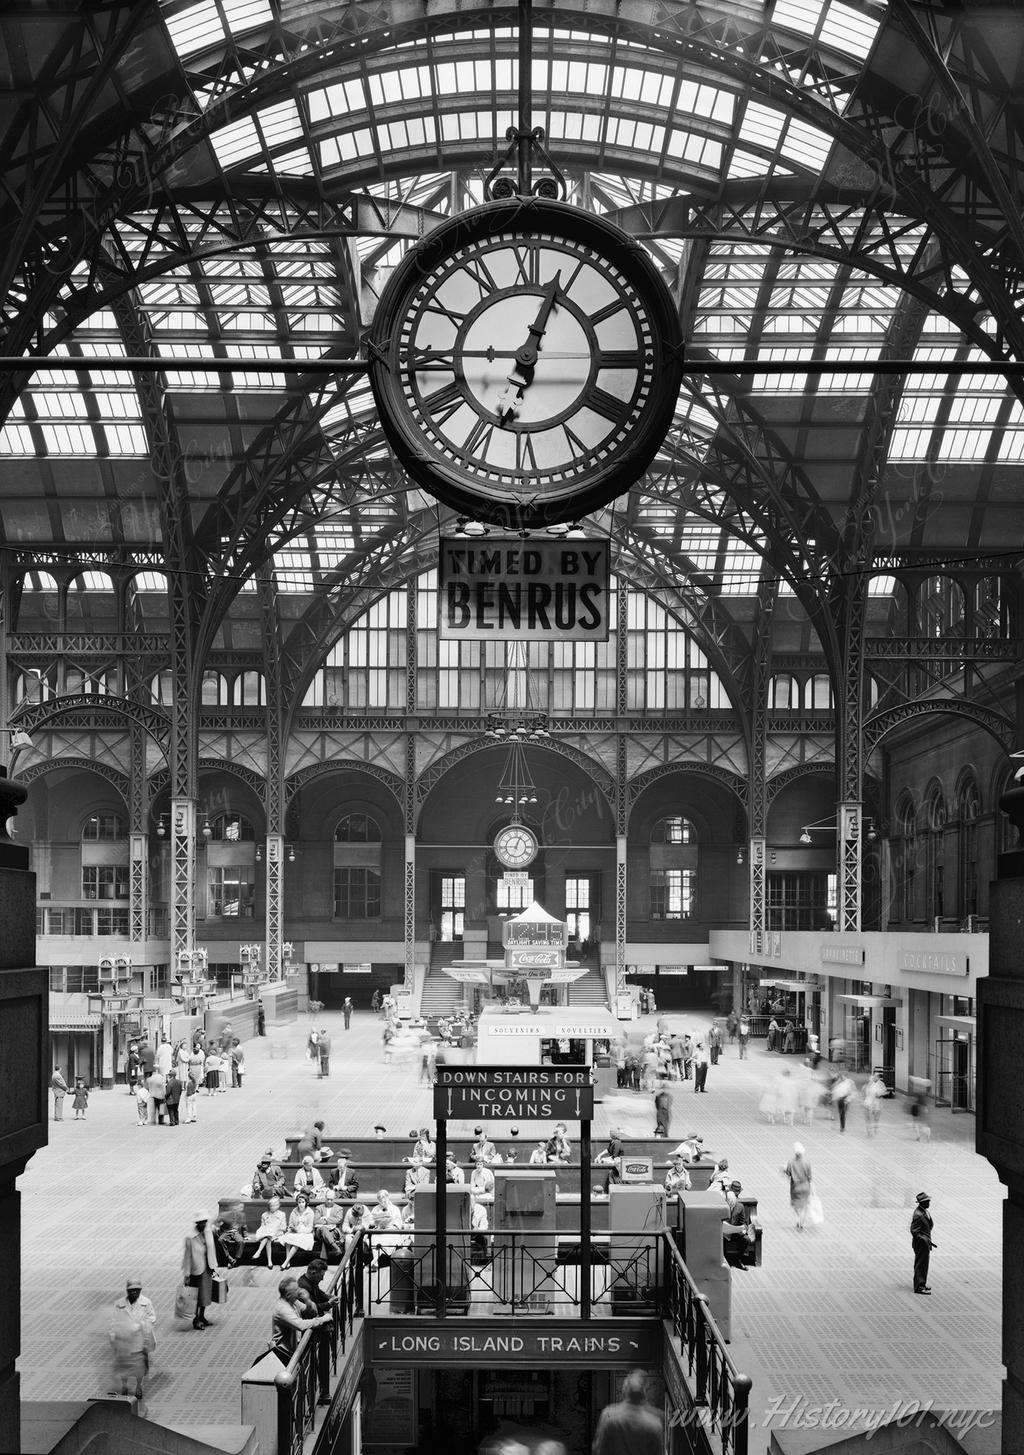 Photograph taken from a Historic American Buildings Survey on April 24, 1962 of the Pennsylvania Station  Concourse from the south.